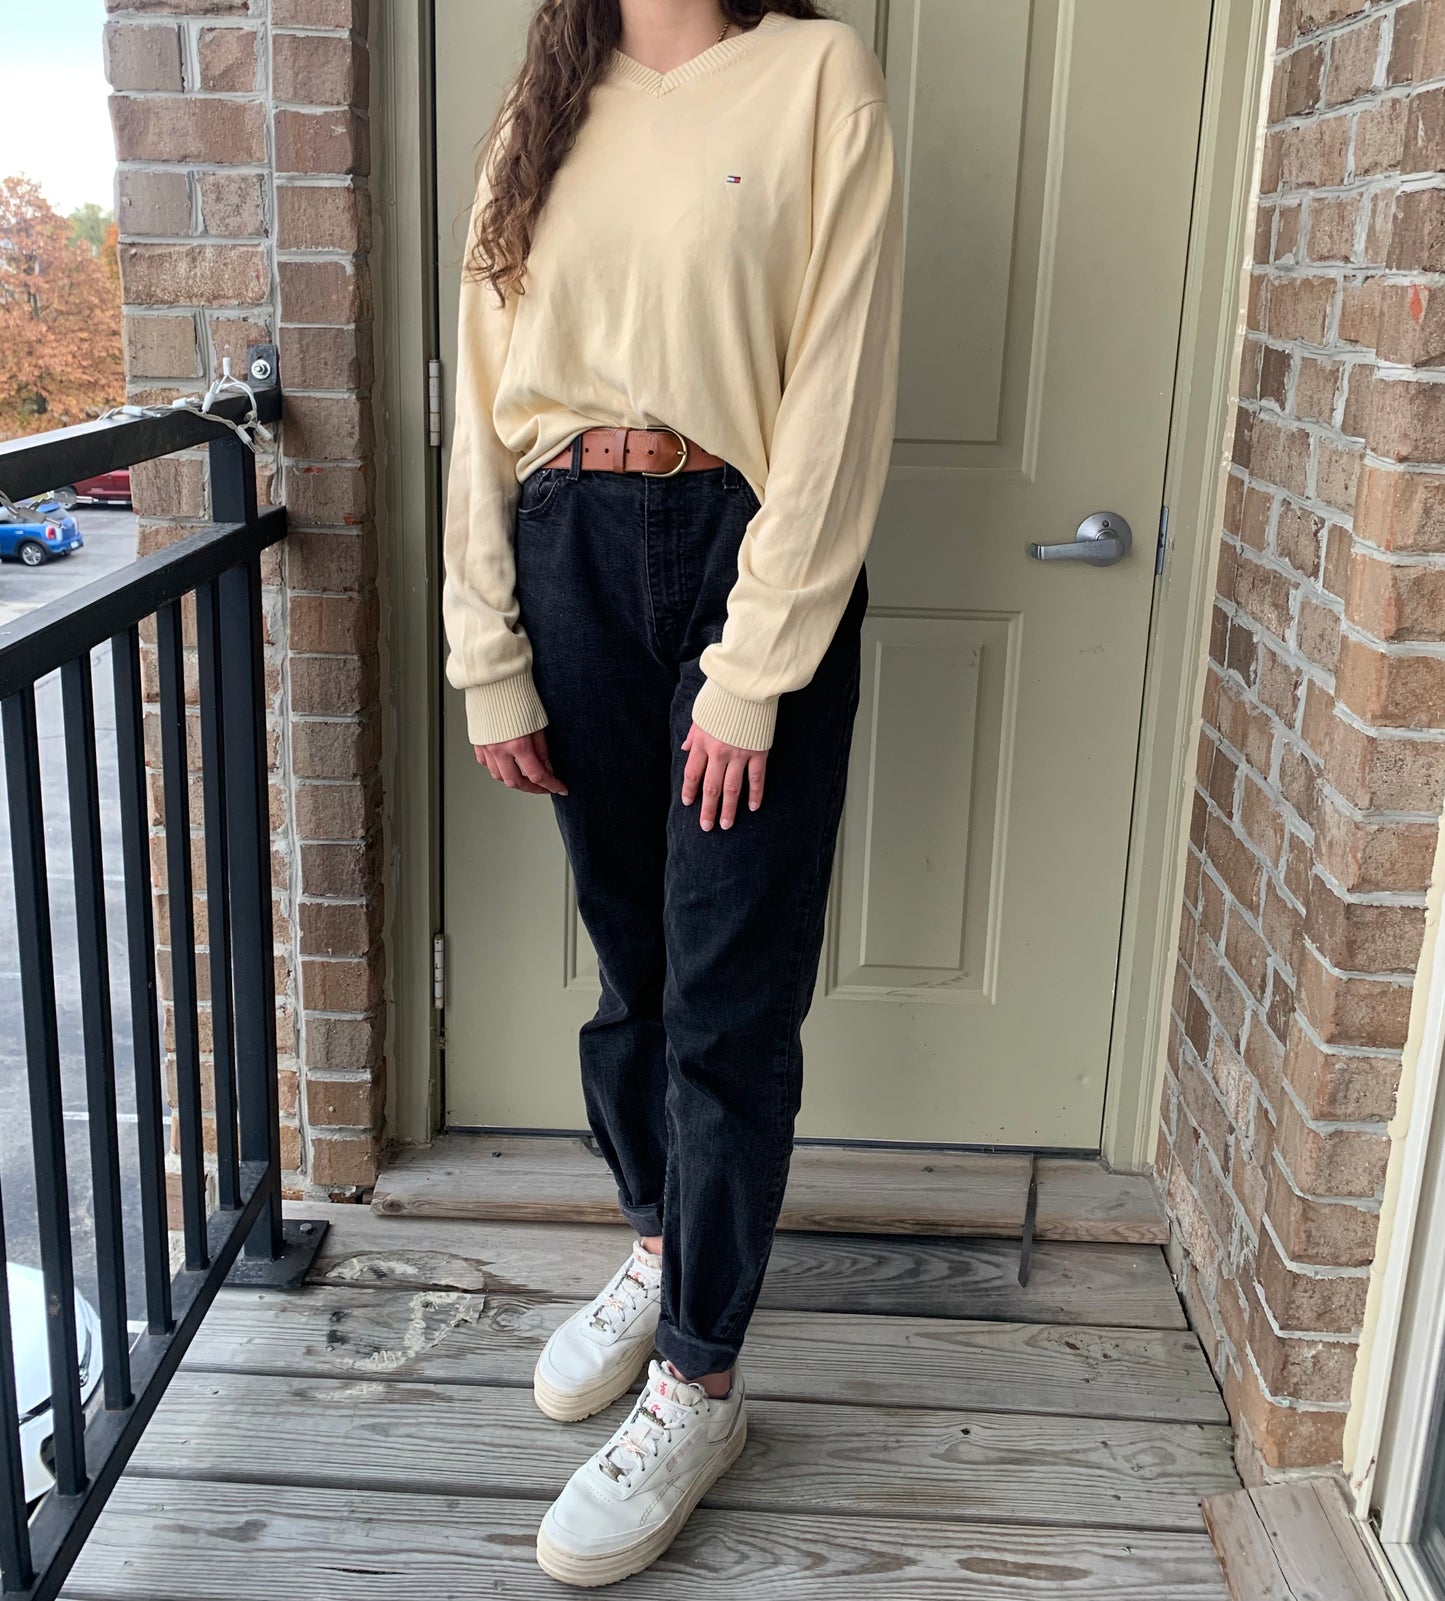 Tommy Hilfiger Yellow Sweater